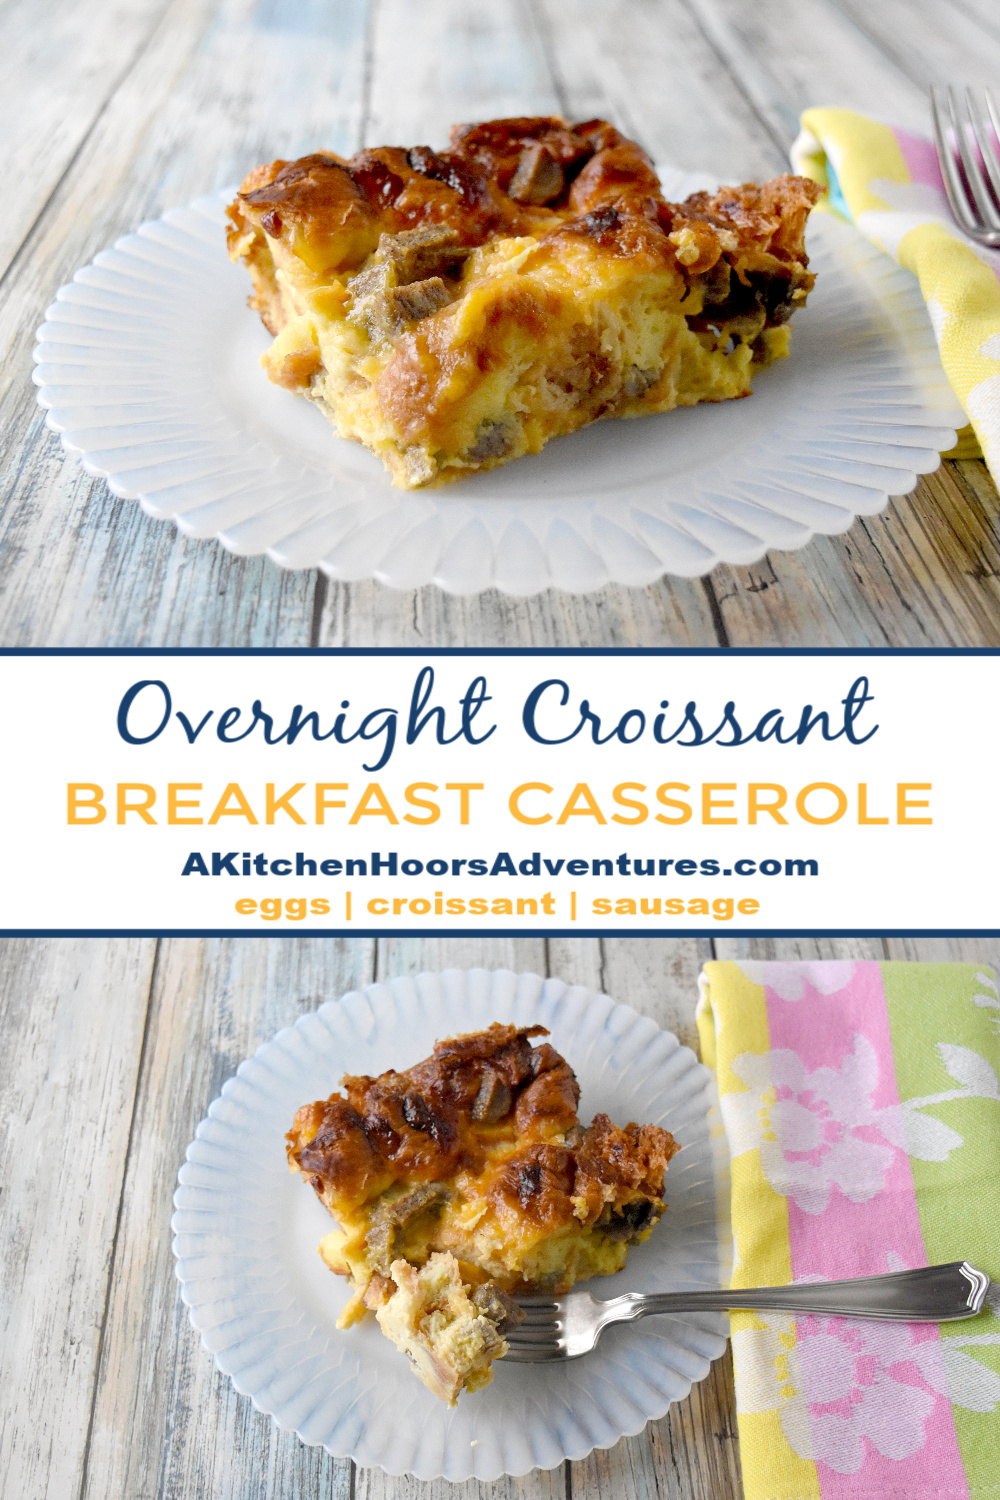 Sausage, Egg, and Cheese Croissant Casserole has just a few ingredients, comes together easily, can be made ahead, and TASTES AWESOME!